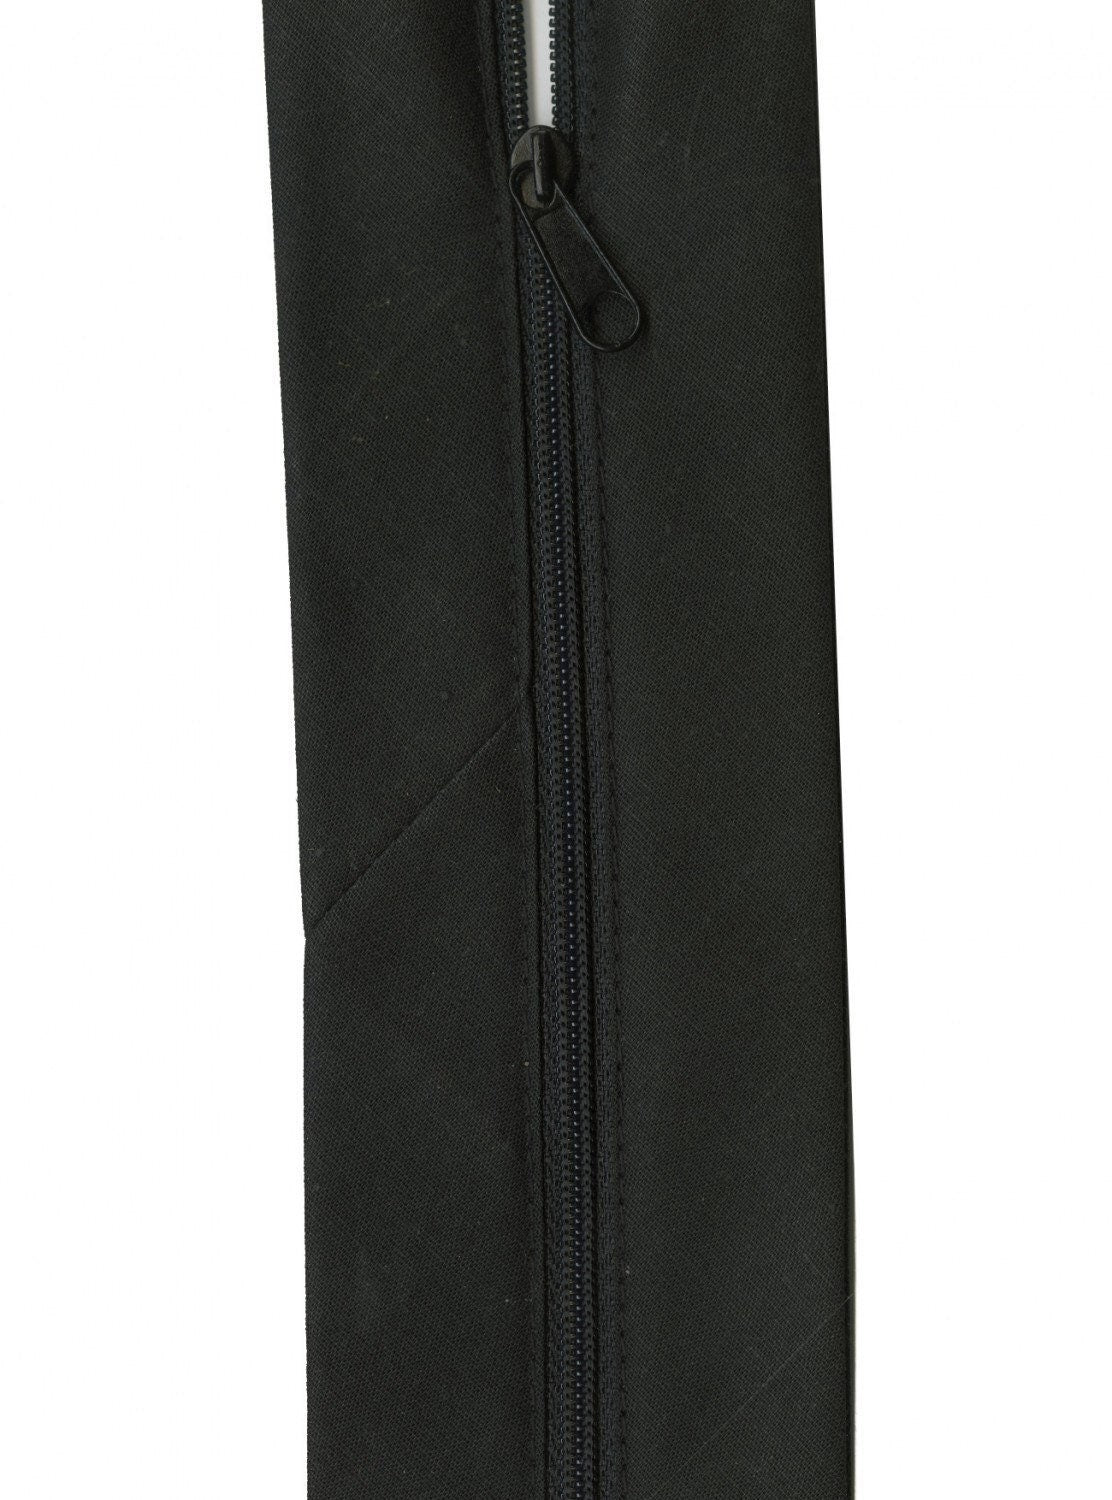 Zippity-Do-Done 18in Zipper With Pull Black